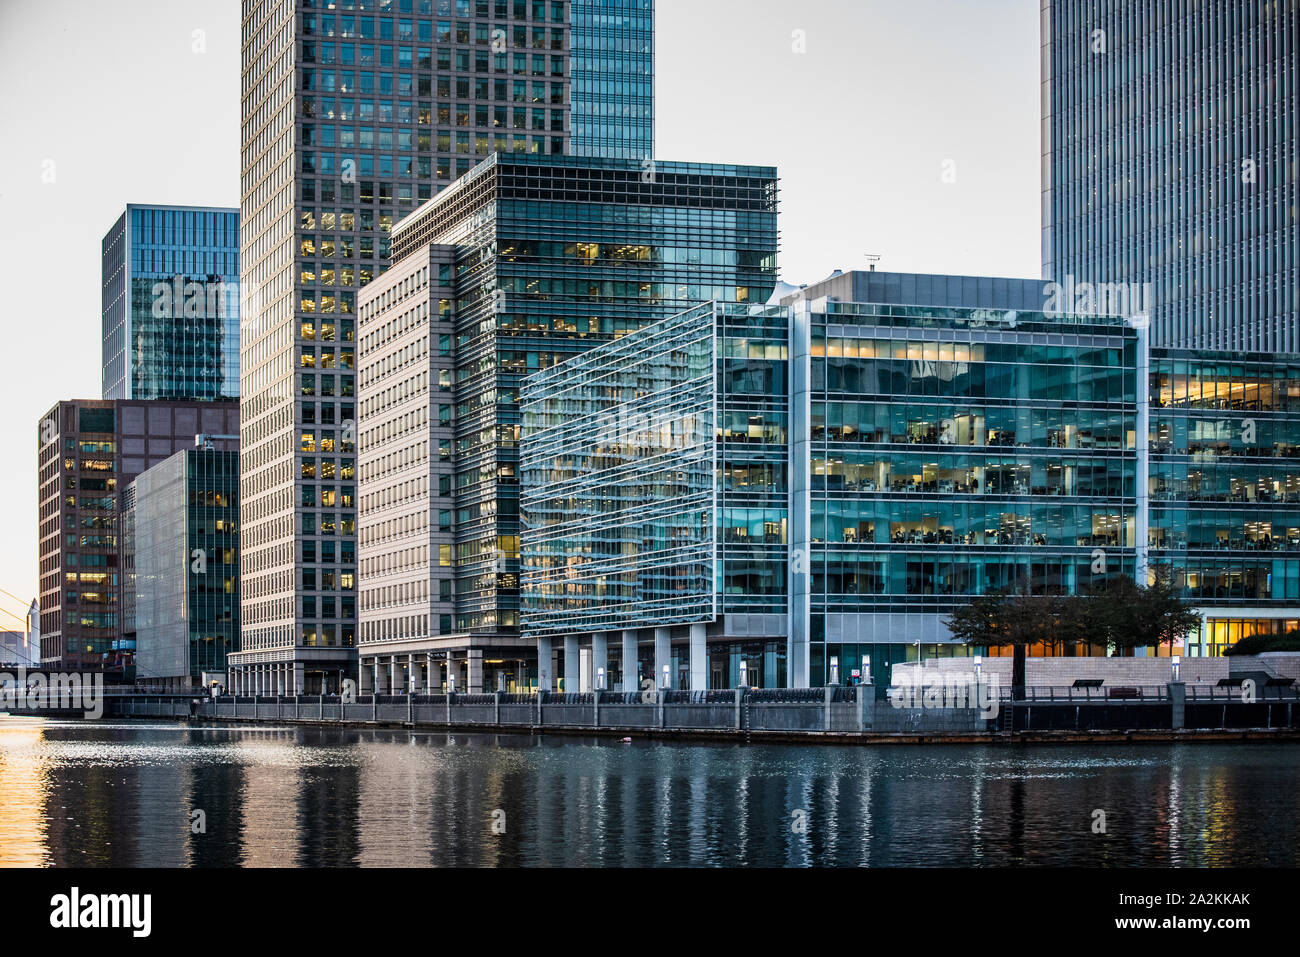 Clifford Chance London Canary Wharf Londra - South Dock - Waterside Buildings Canary Wharf South Dock Quayside. Studio legale Clifford Chance in primo piano Foto Stock